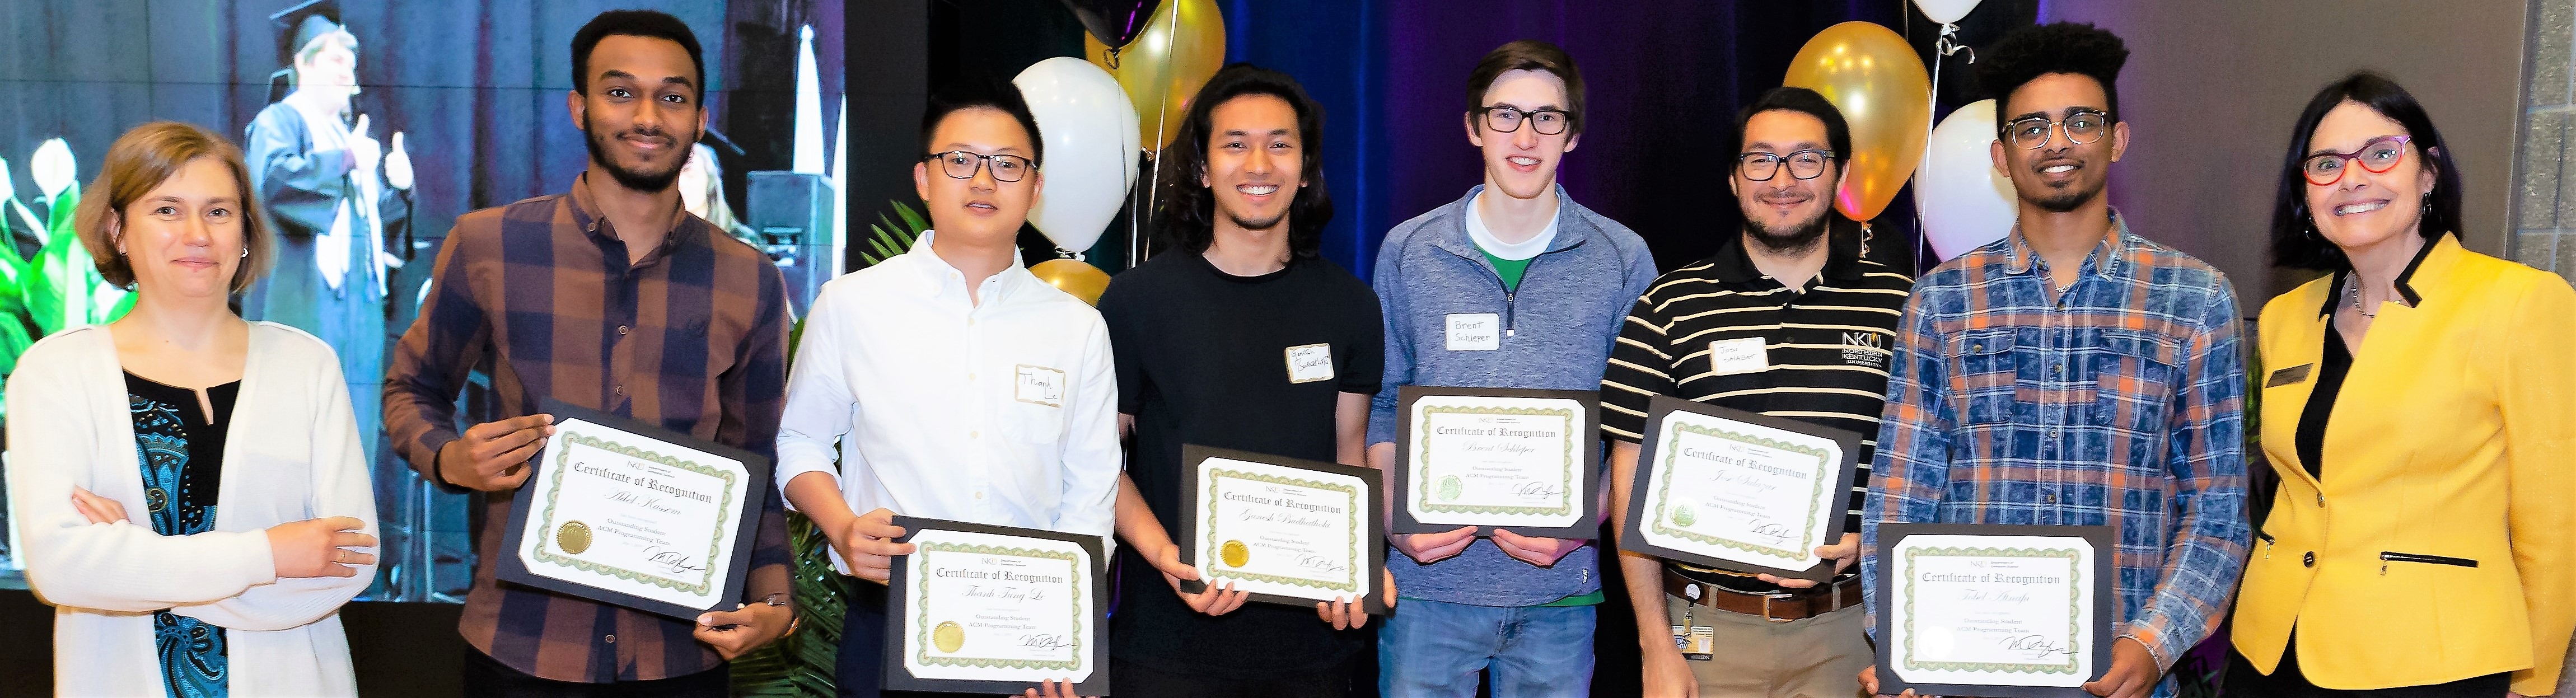 2018-2019 student recognition attendees